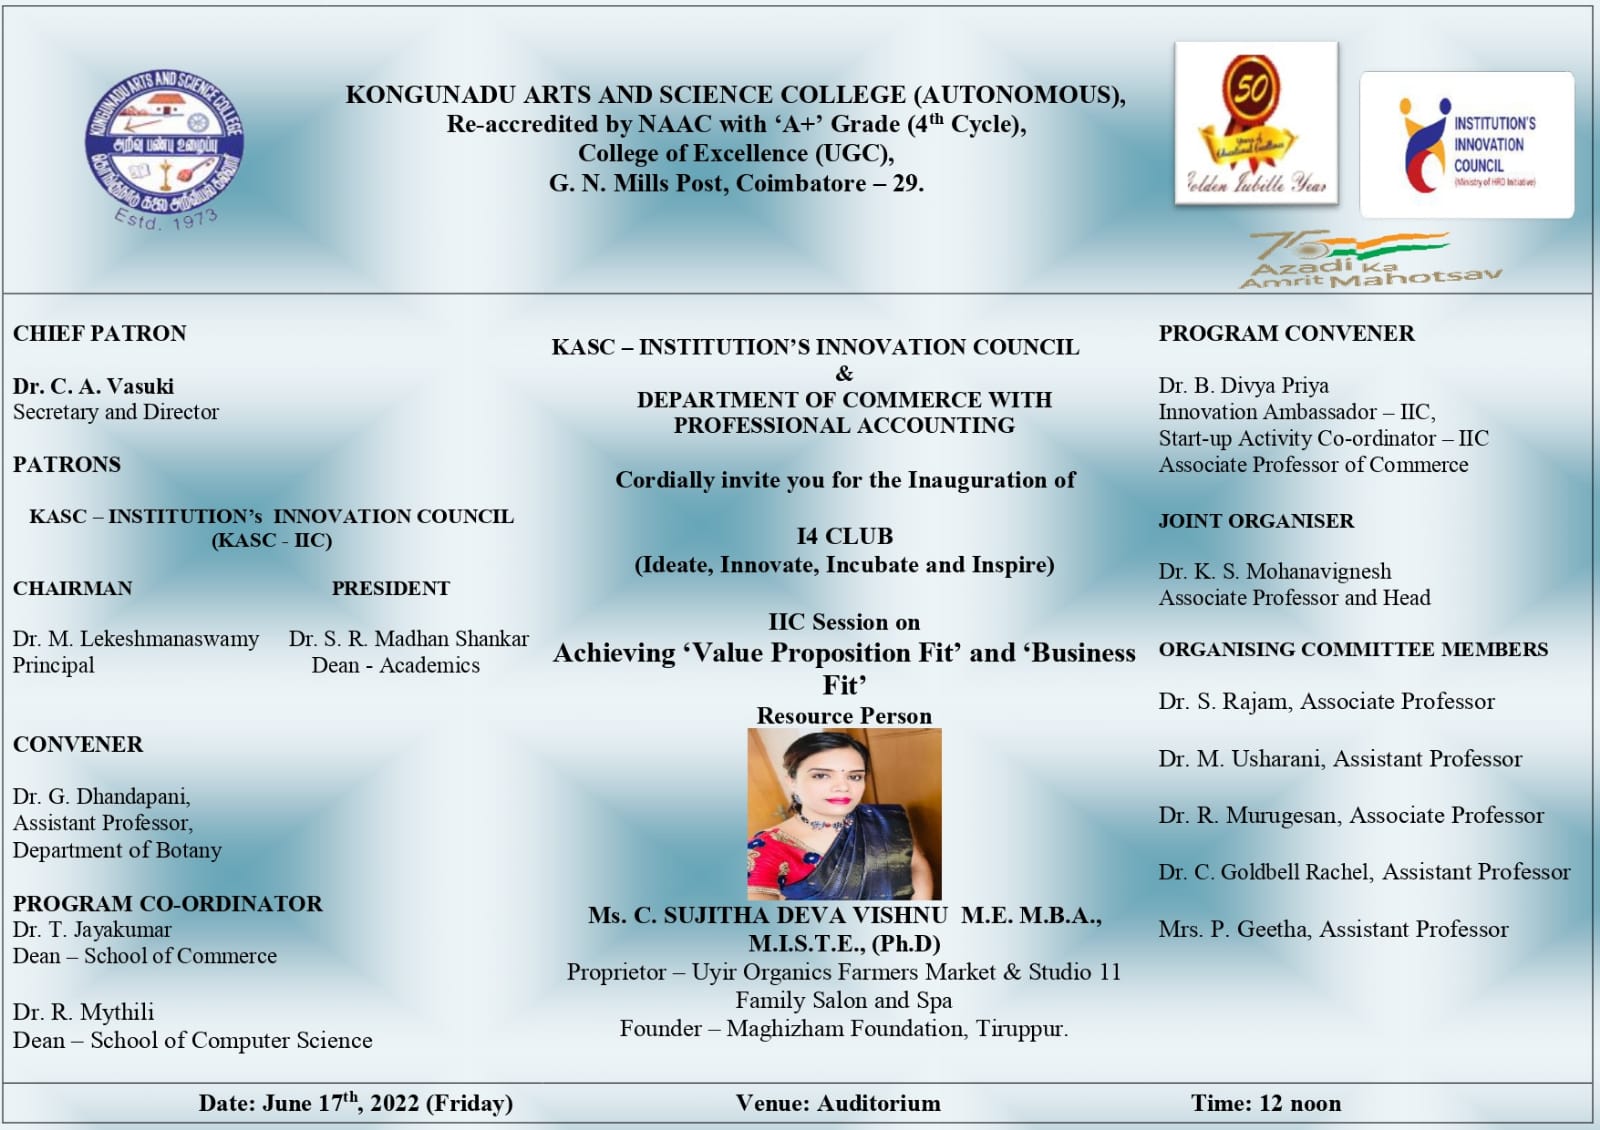 Kasc - Institution's Innovation Council and Department of Commerce with Professional Accounting  cordially invites You All 